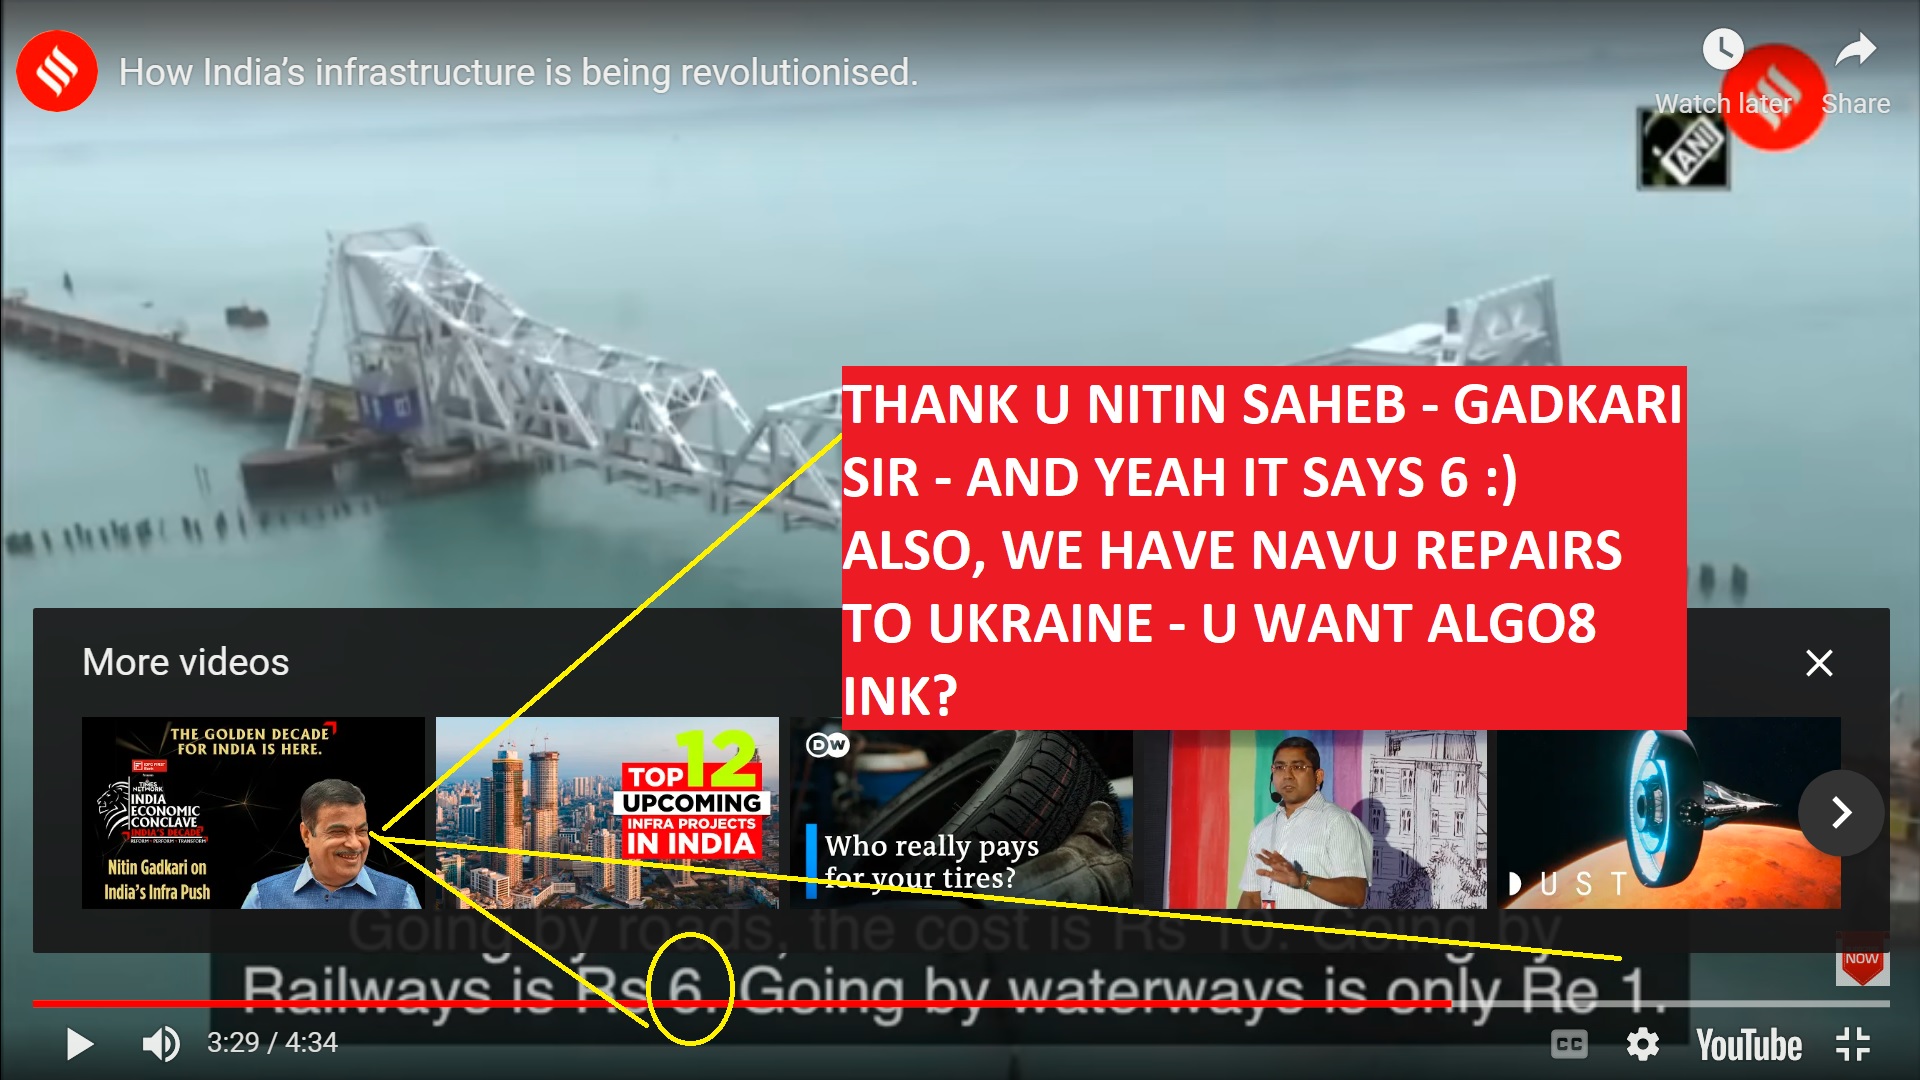 ALINA MATSENKO AJAY MISHRA MESSAGE TO MODI AND GADKARI - EYHS ITS 6 AND 1 DIVDIE BY 6 - IS - EAZY ROI EVEN - RAILWSY - VS WATE R BASED INFRASTUCTRE AND DEVELOPMENT